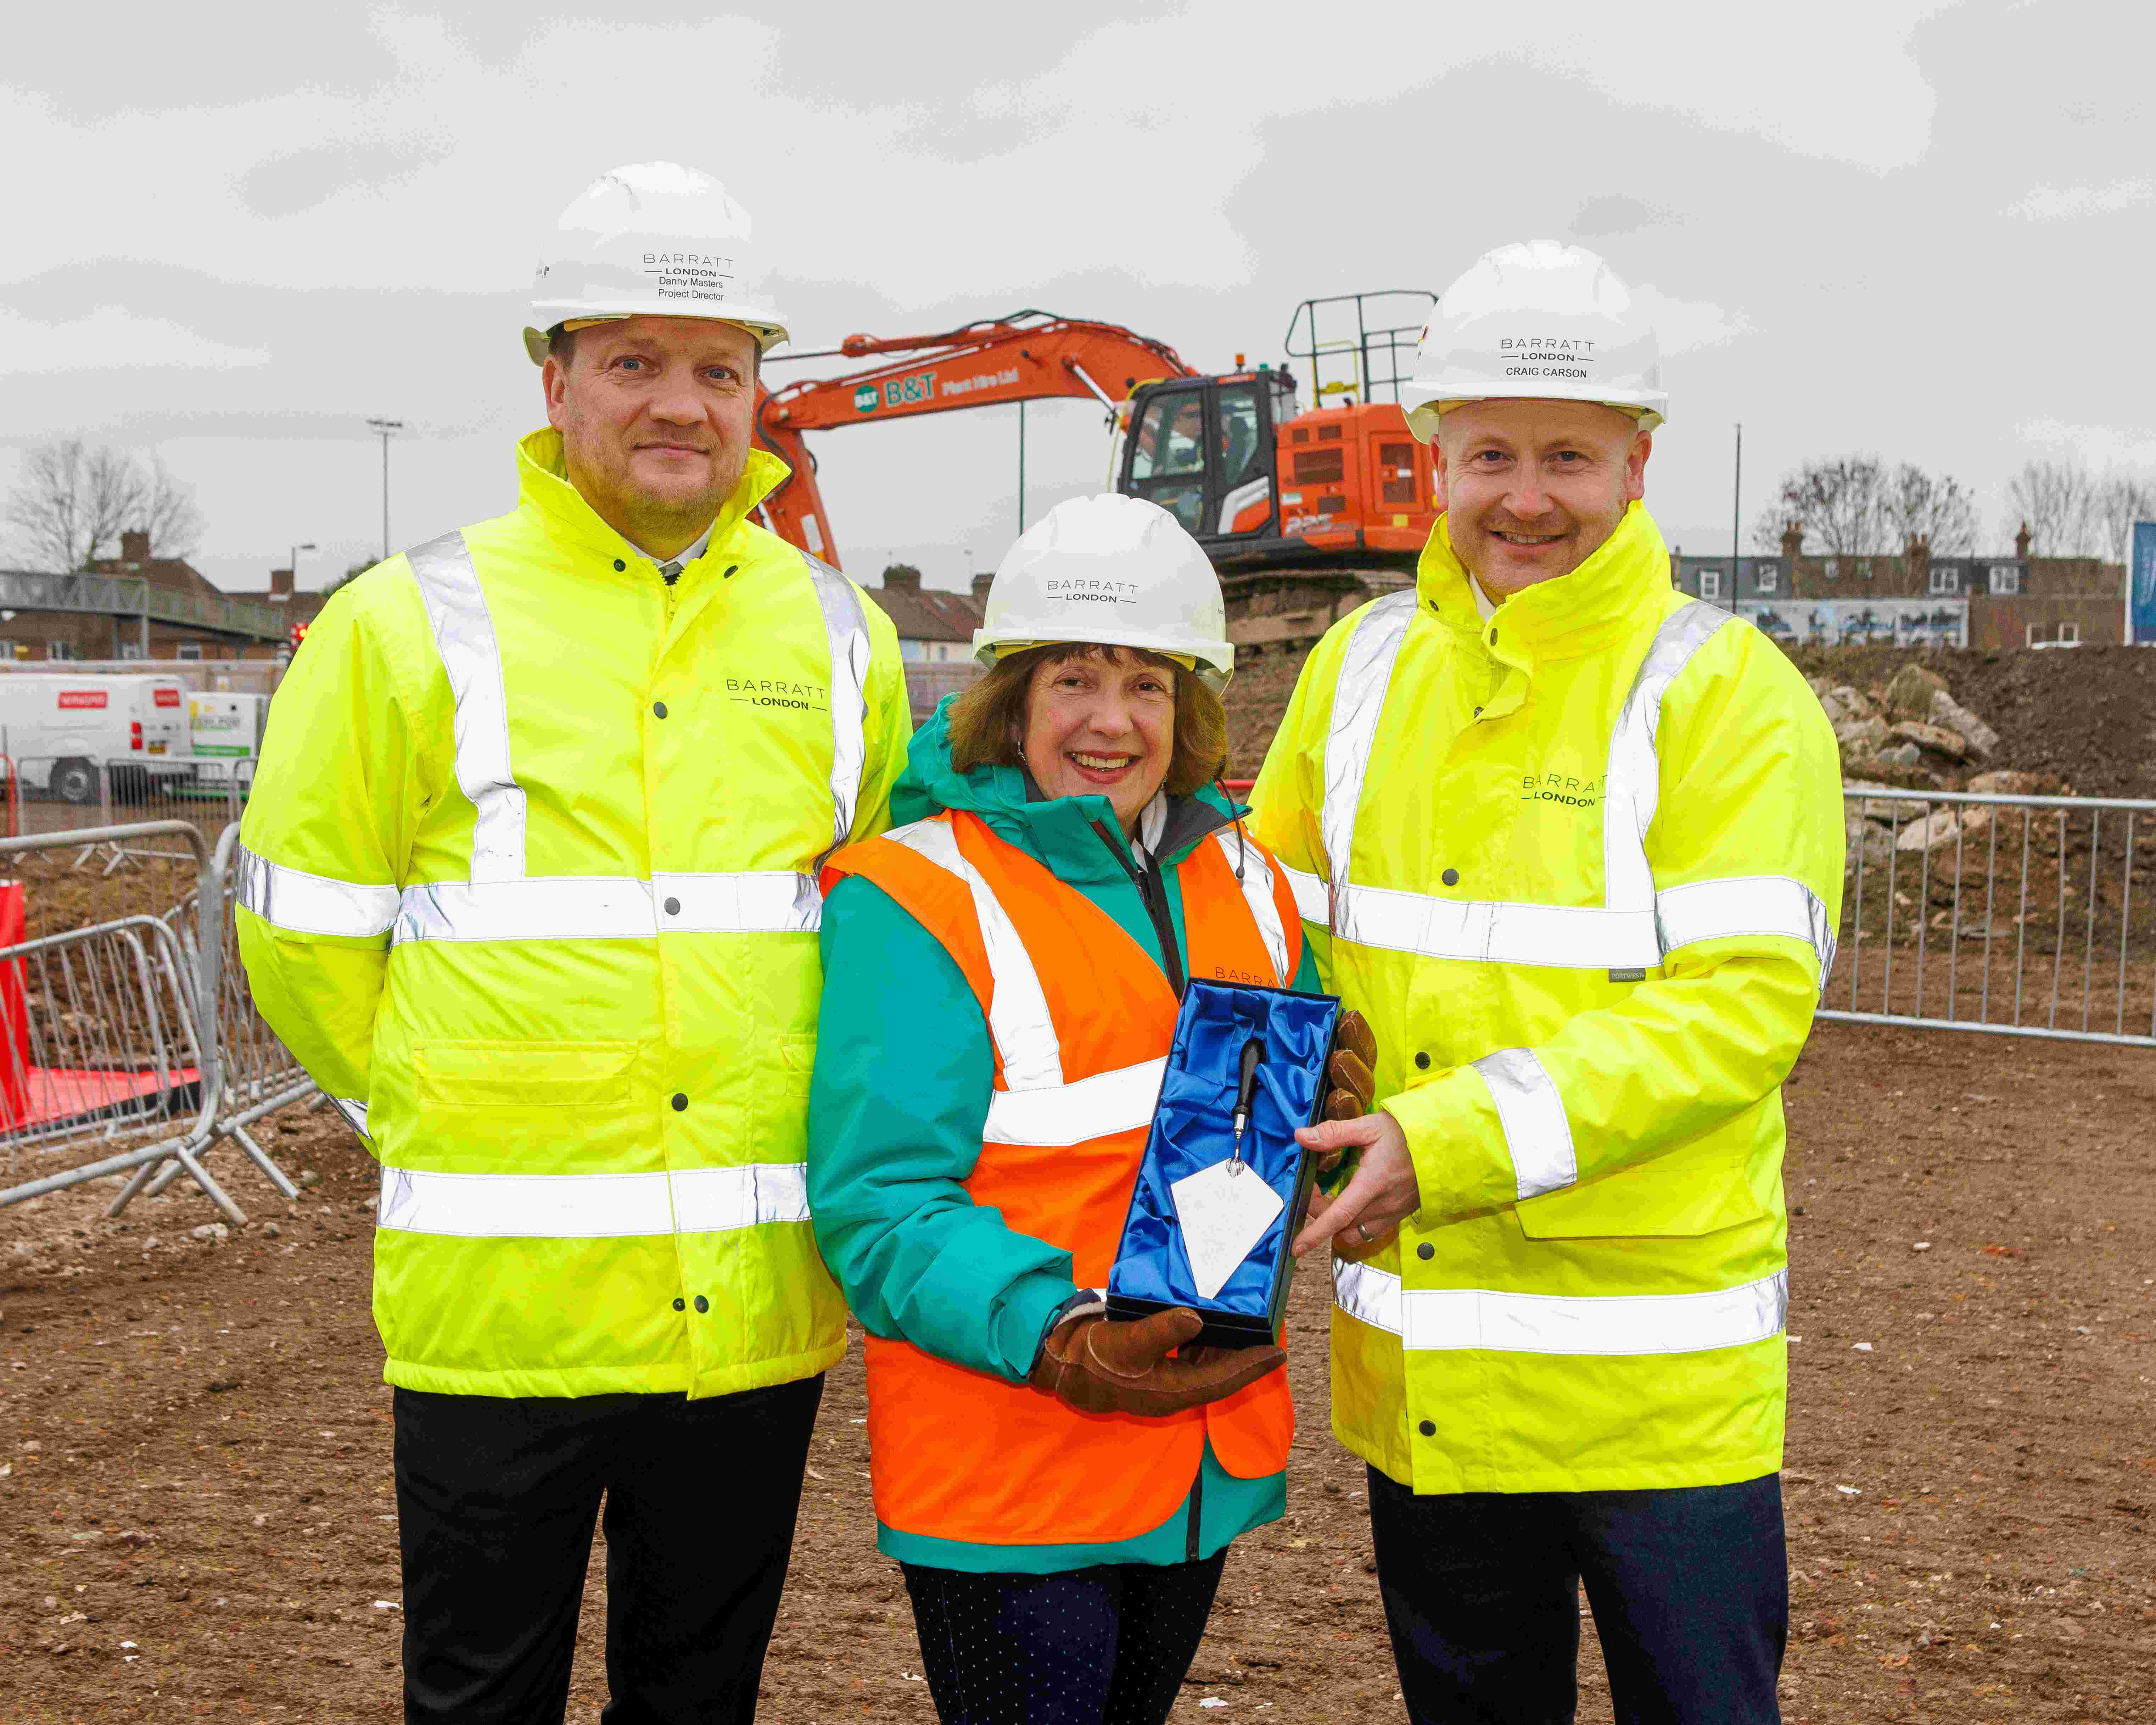 Residential developer Barratt London marked its groundbreaking ceremony for its new project. (Photo: Supplied)